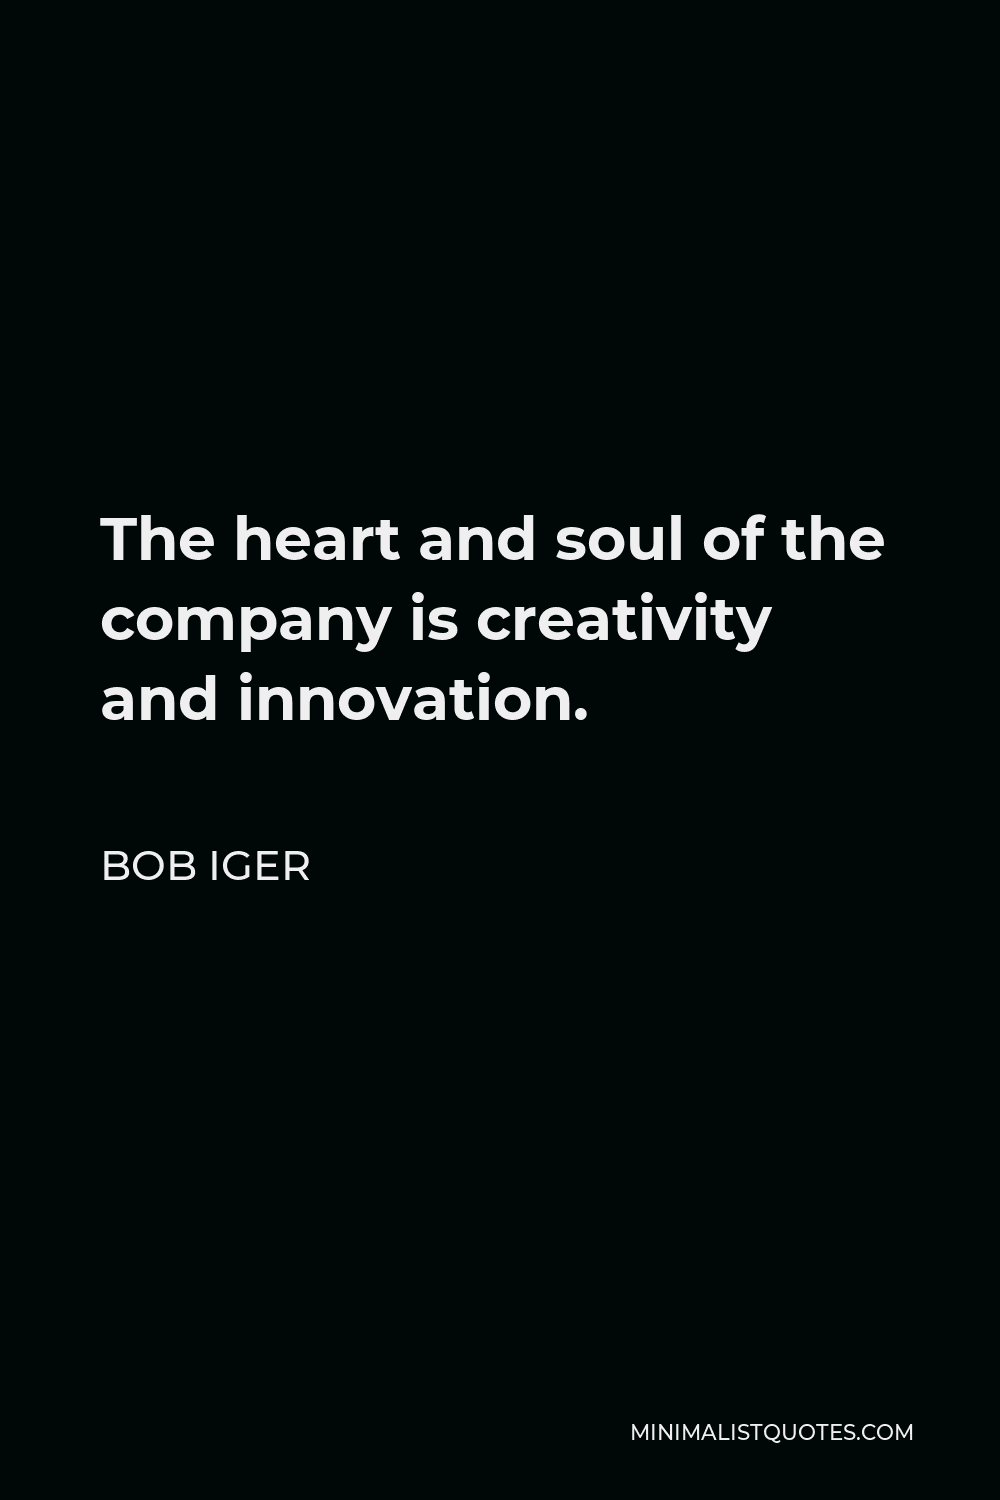 Bob Iger Quote - The heart and soul of the company is creativity and innovation.